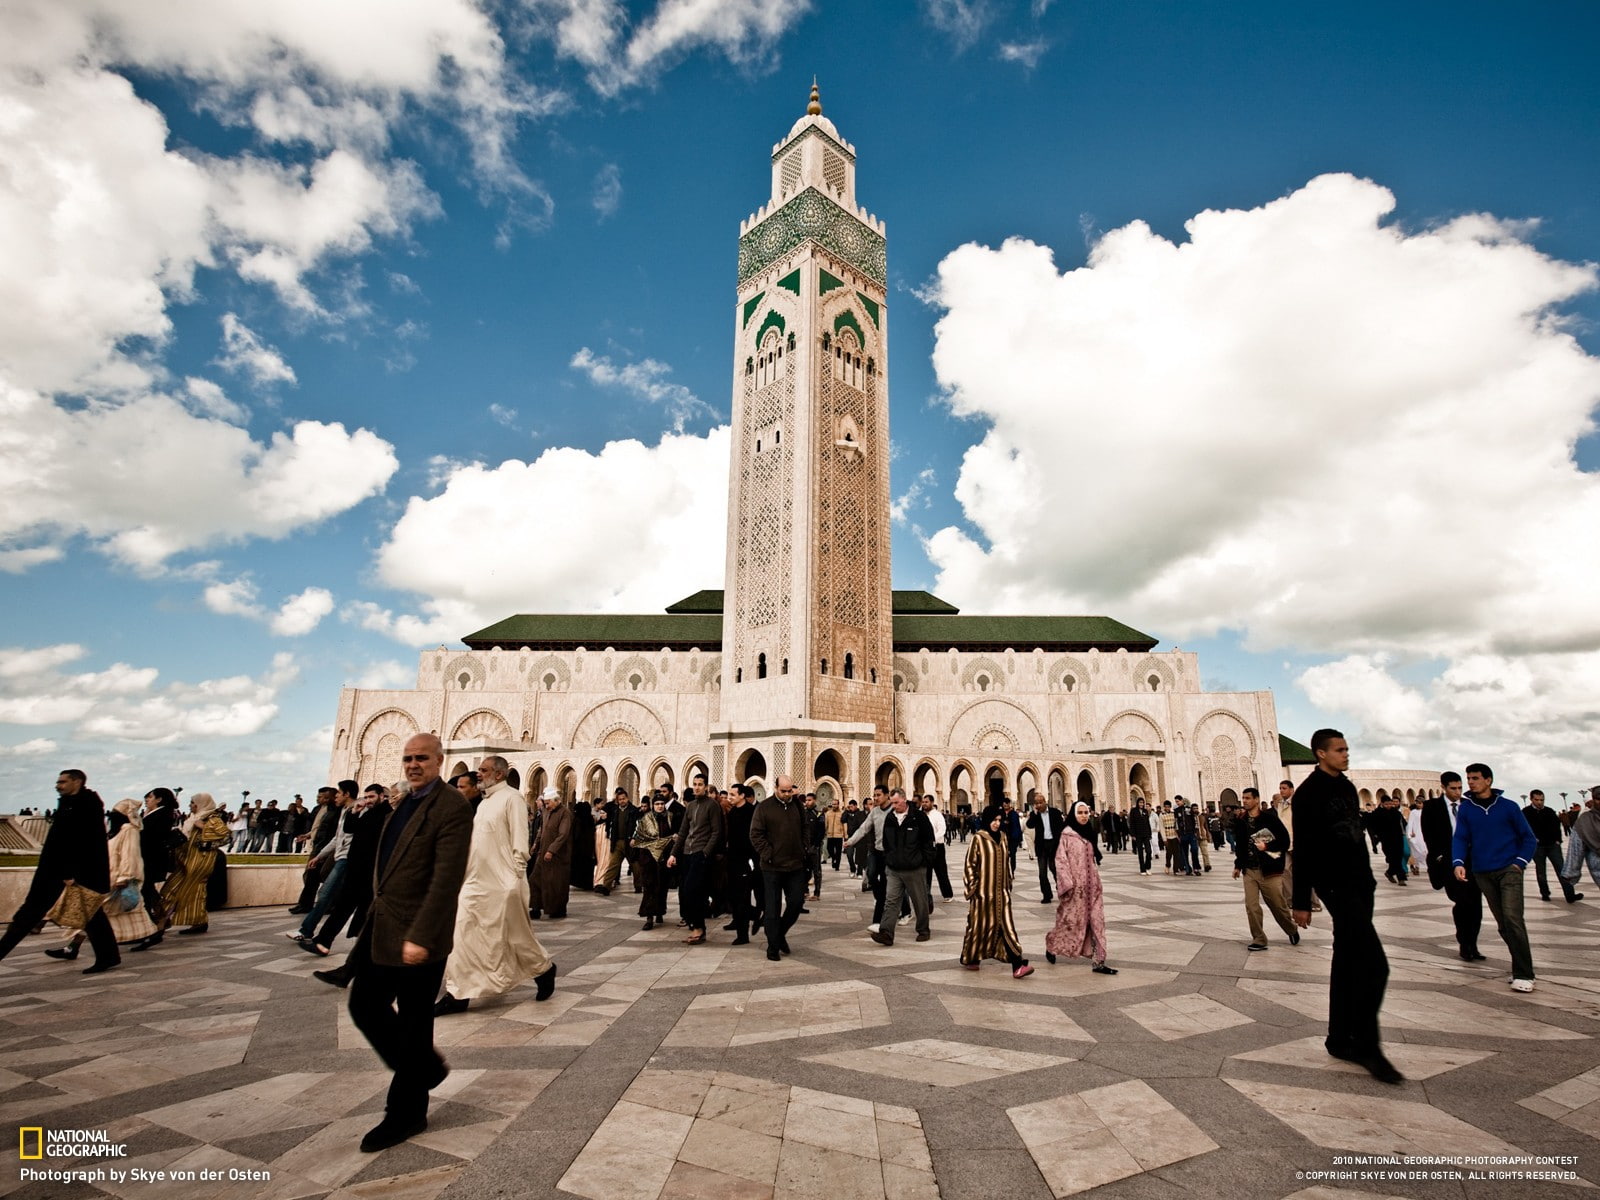 Morocco, Casablanca, large group of people, crowd, architecture